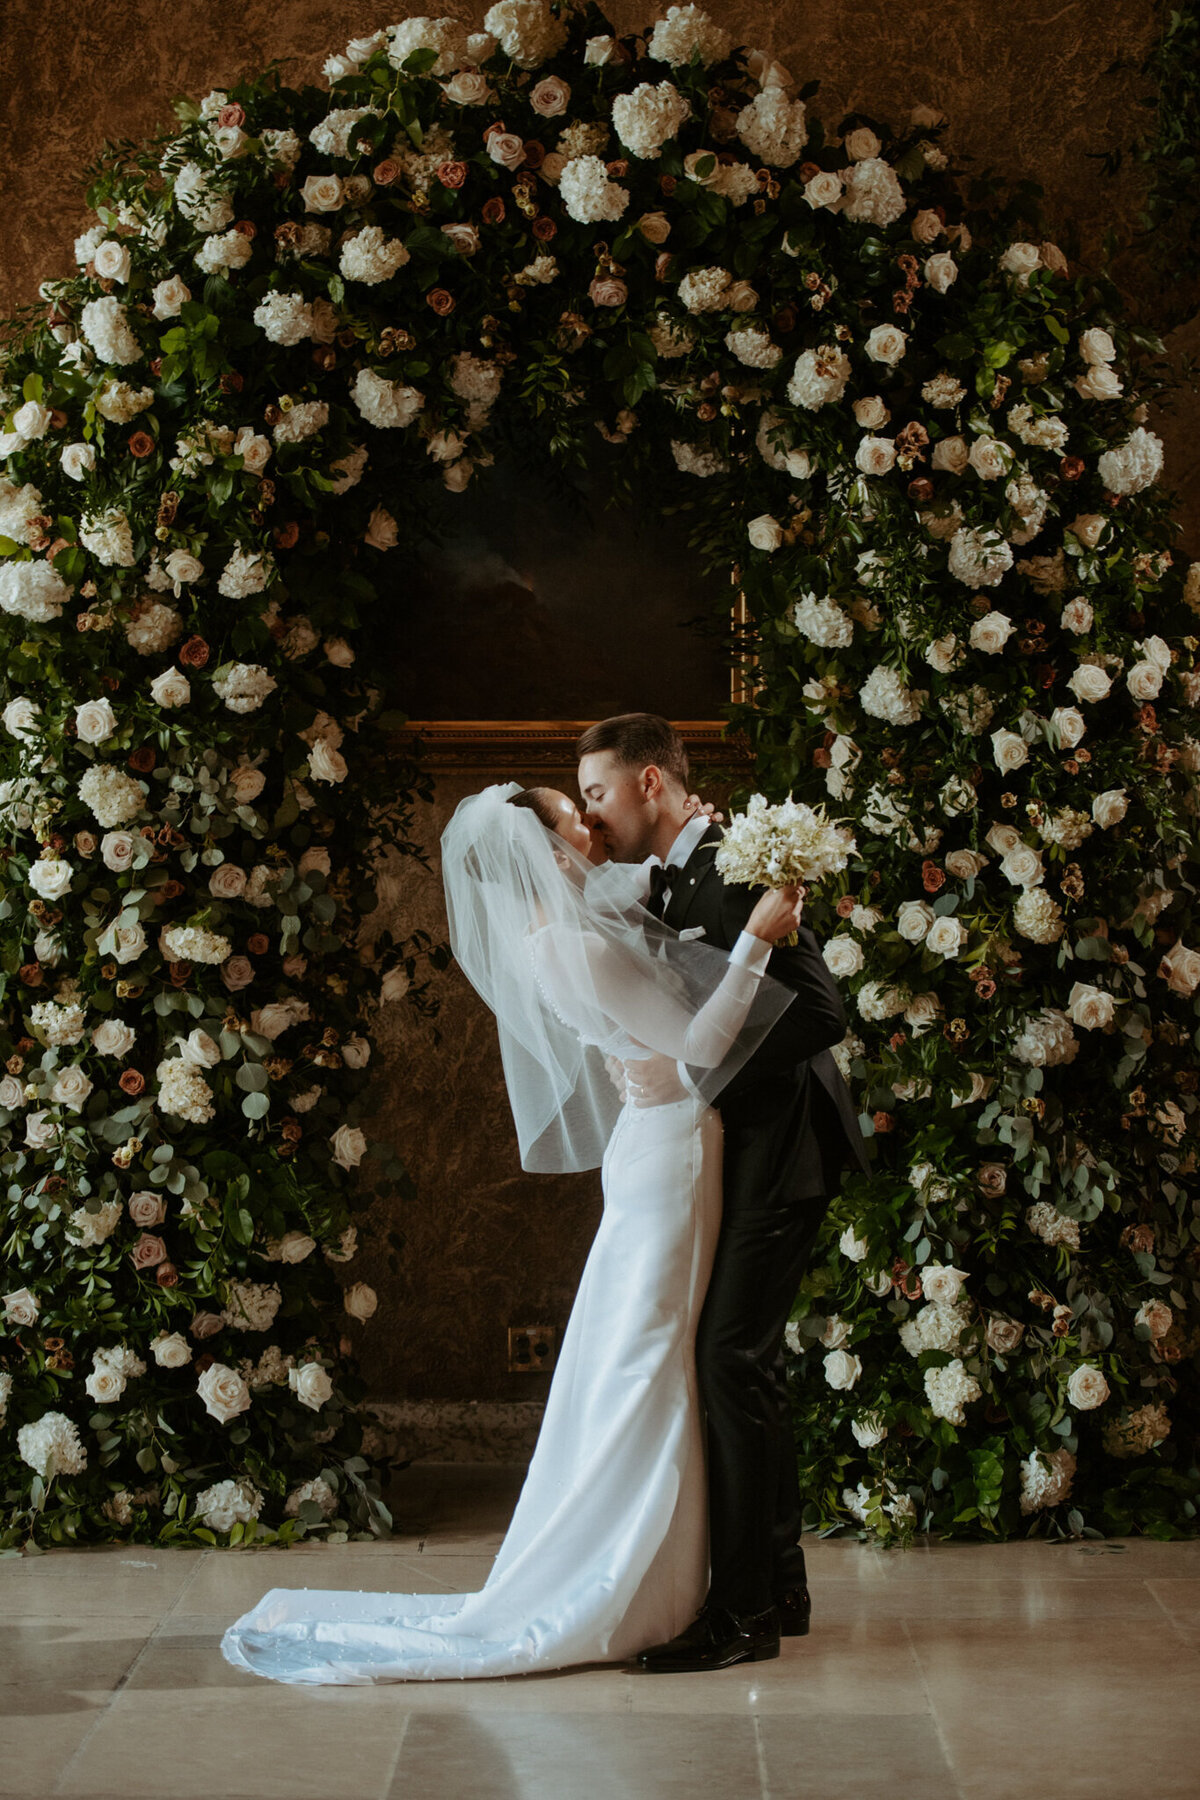 Stunning ceremony floral arch or white roses by Calyx Floral Design, an innovative Red Deer, Alberta wedding florist, featured on the Brontë Bride Vendor Guide.